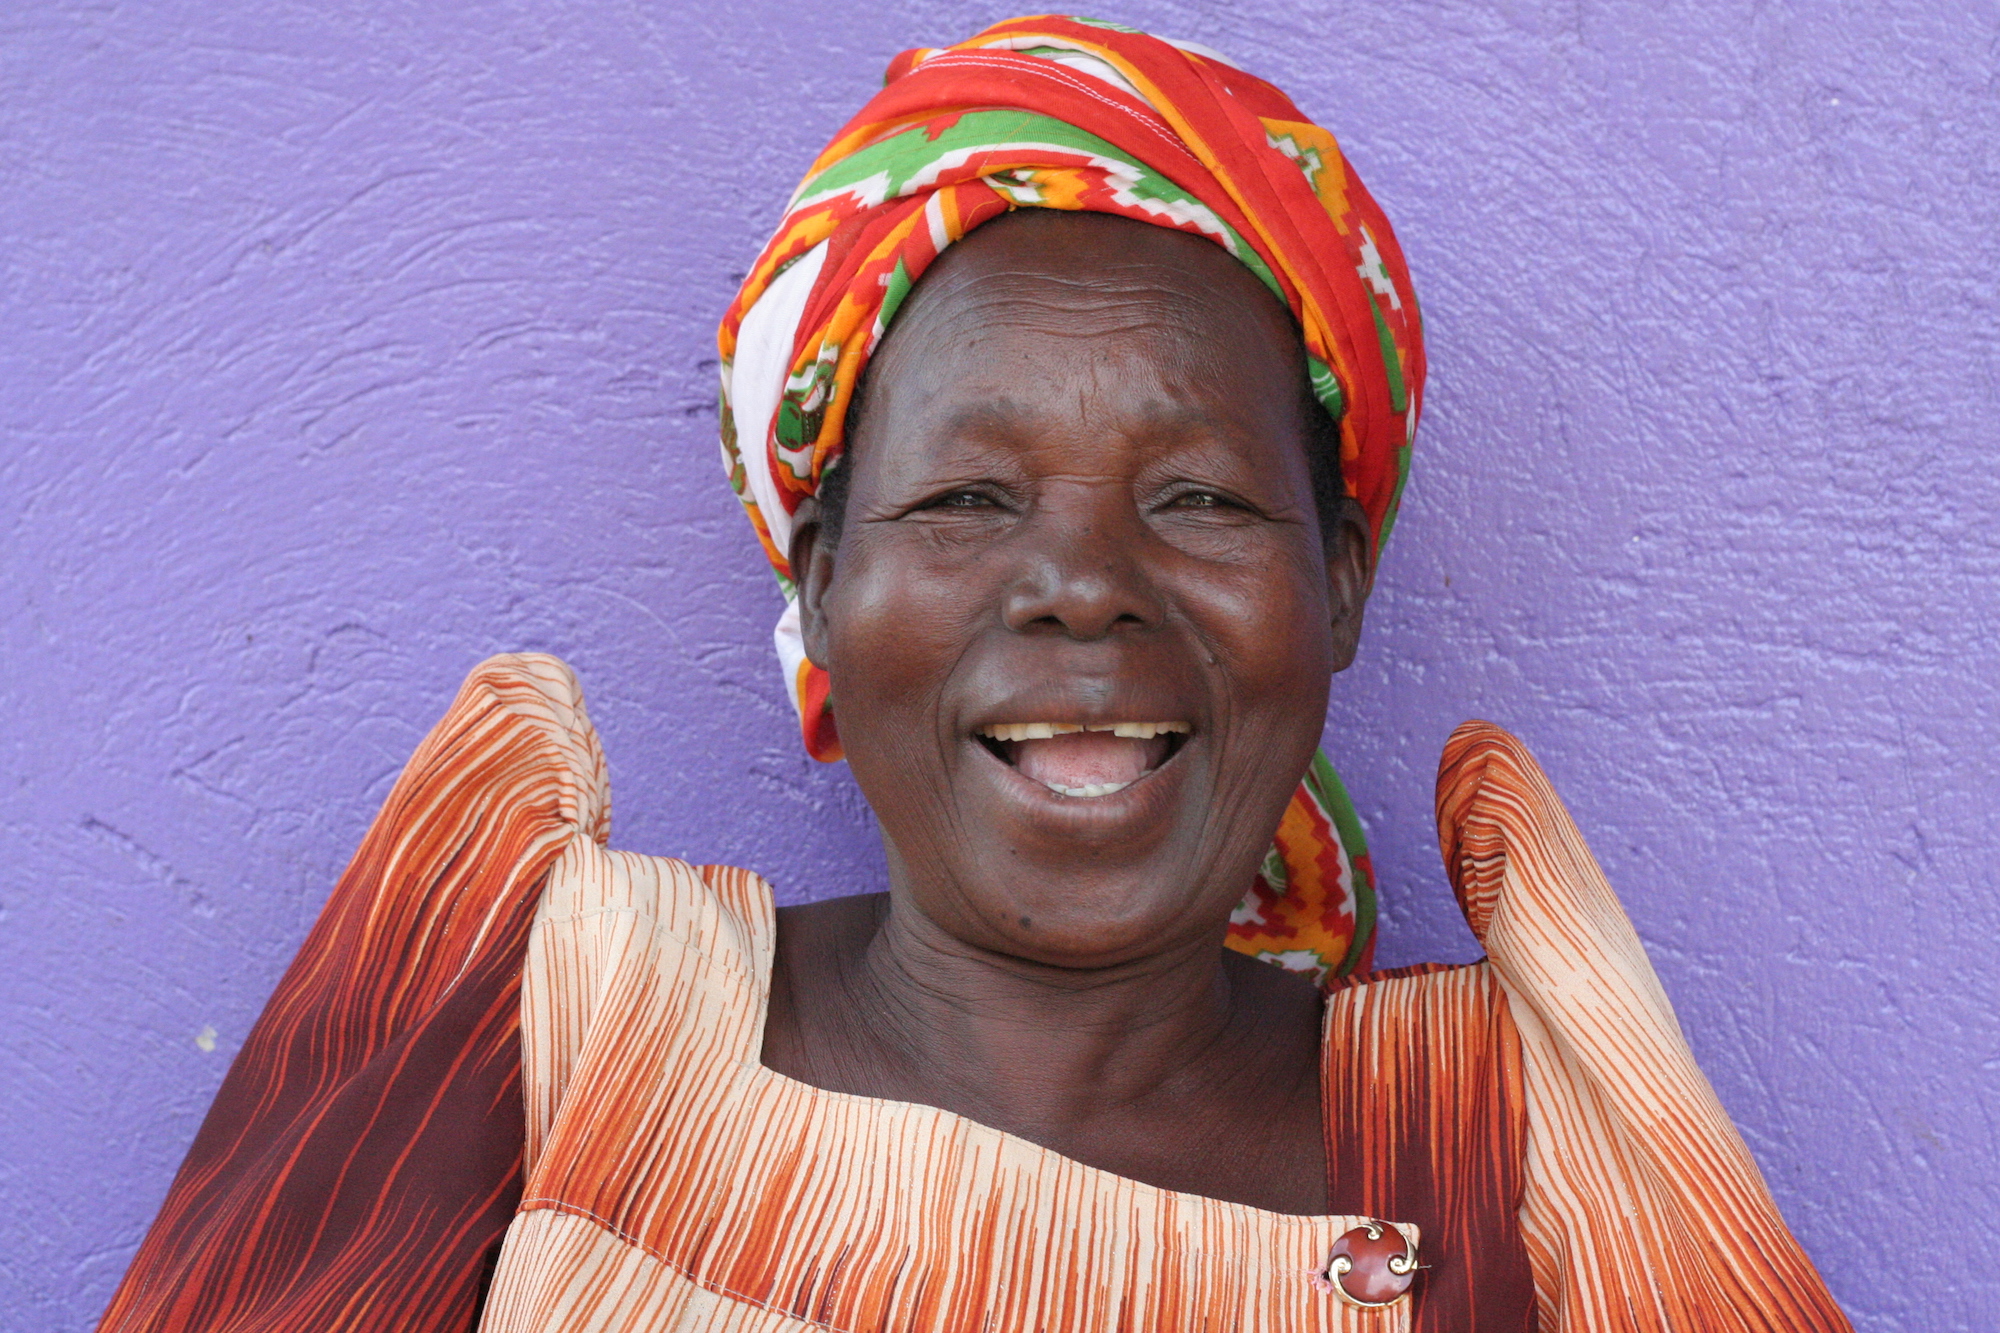 Laughing woman in front of a purple wall